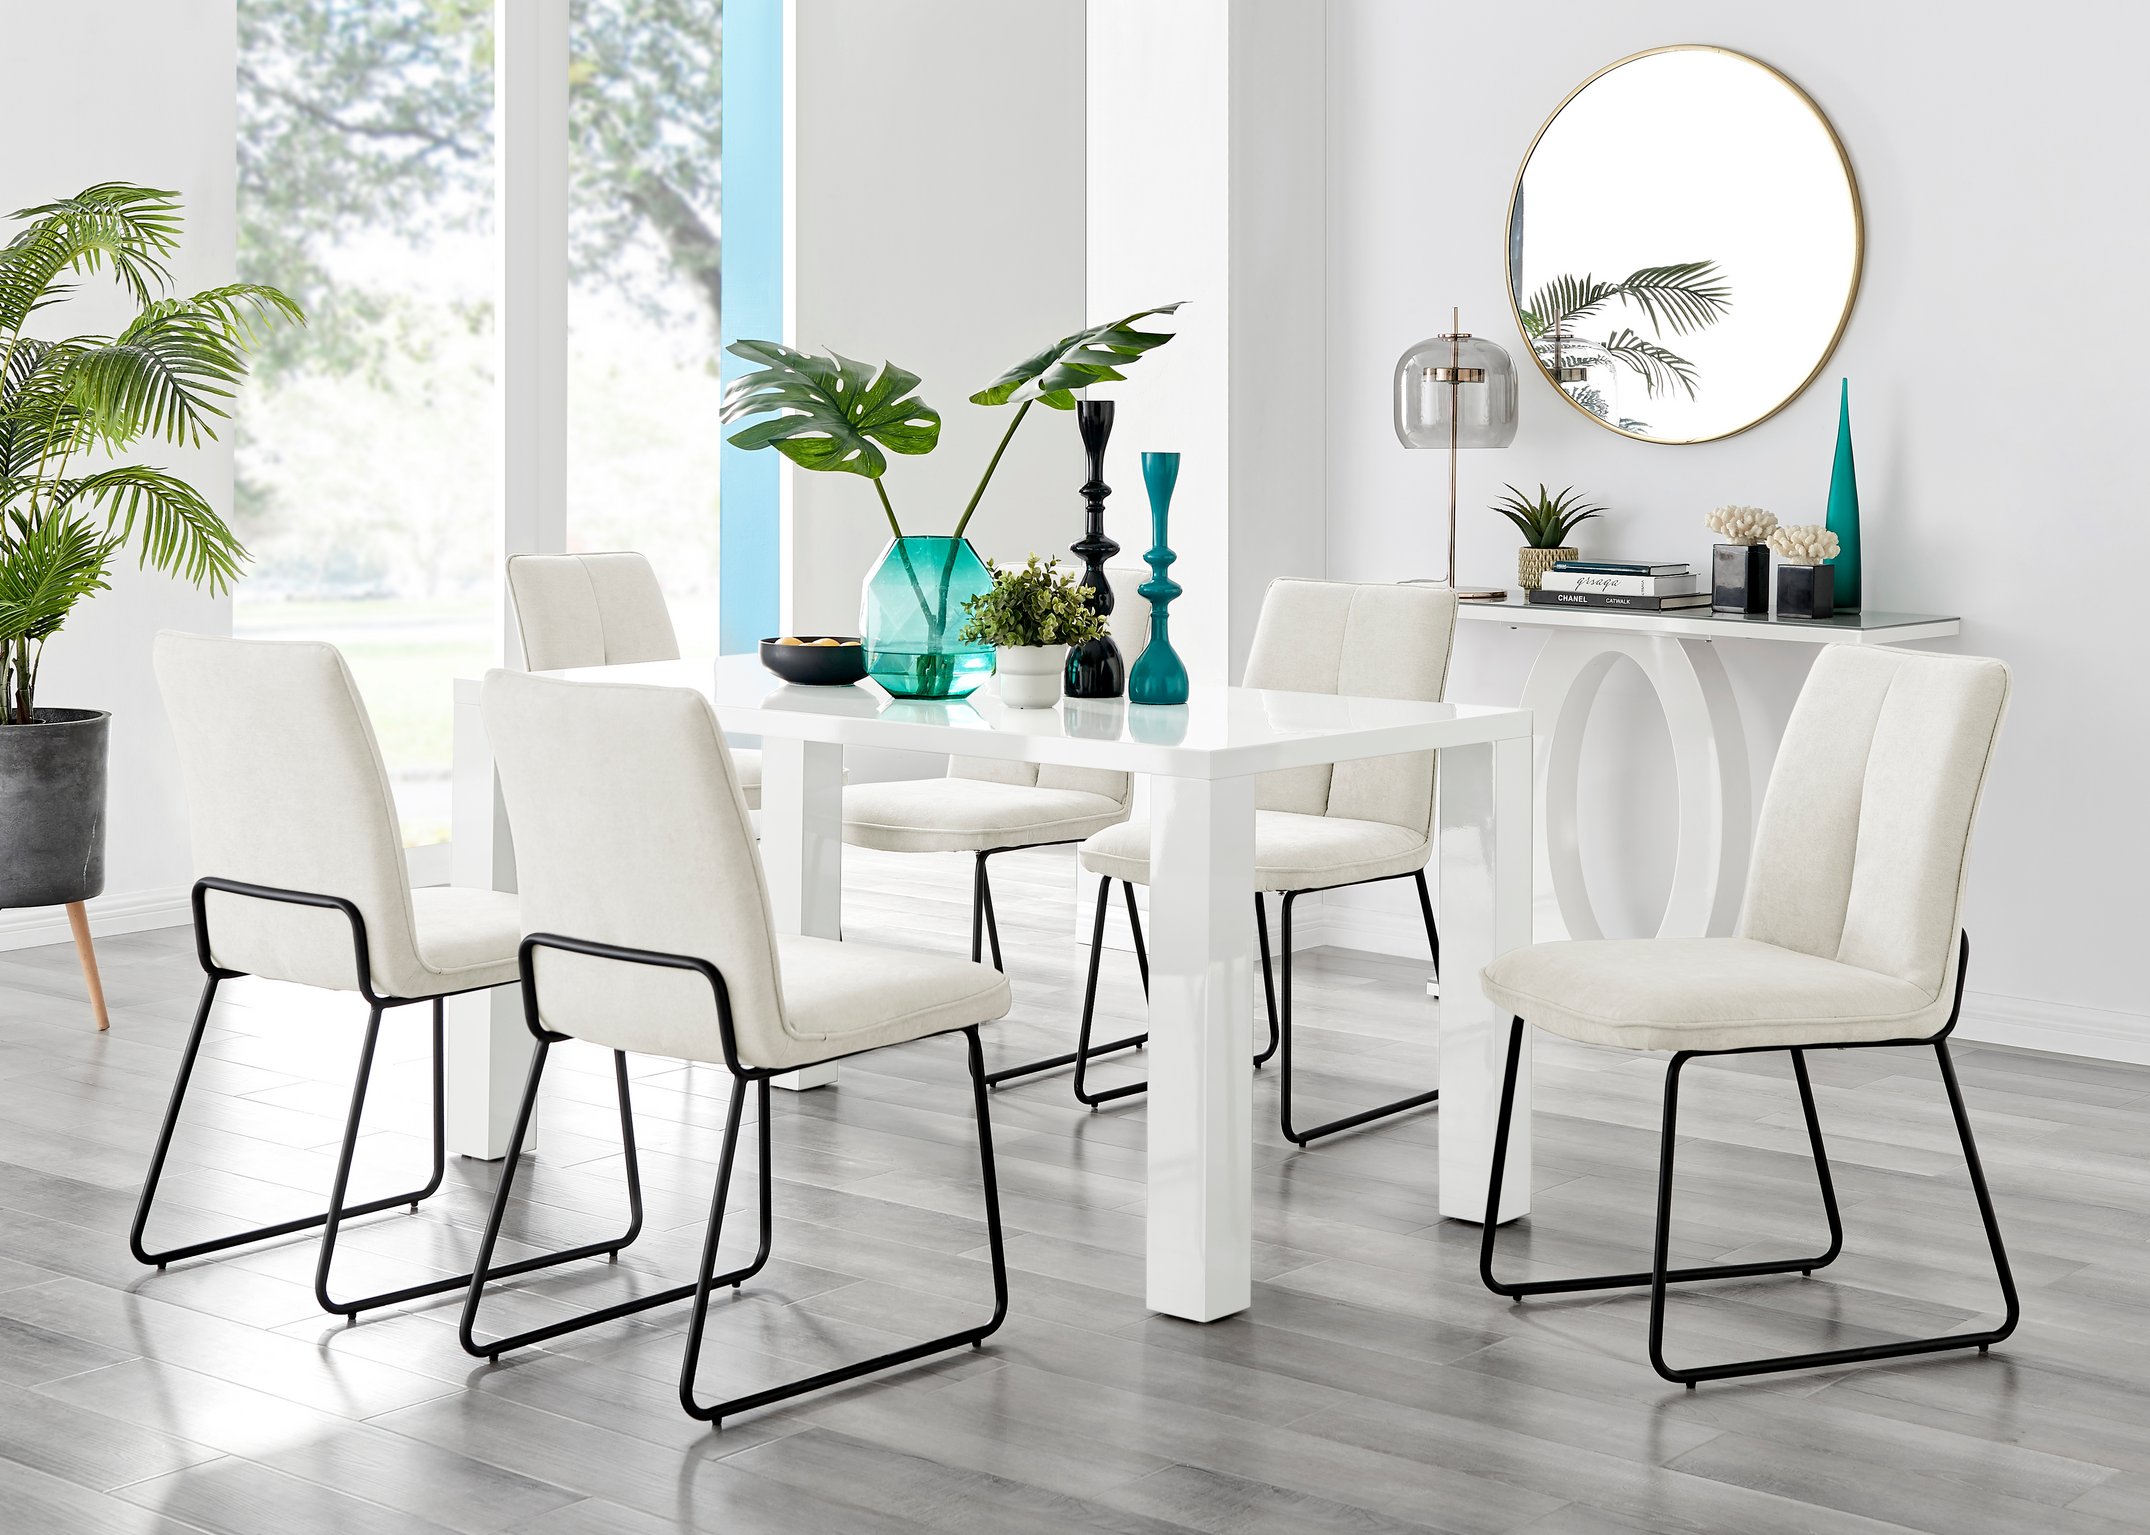 PIVERO White High Gloss Dining Table 150x80cm and 6 Halle Chairs Furniture Set